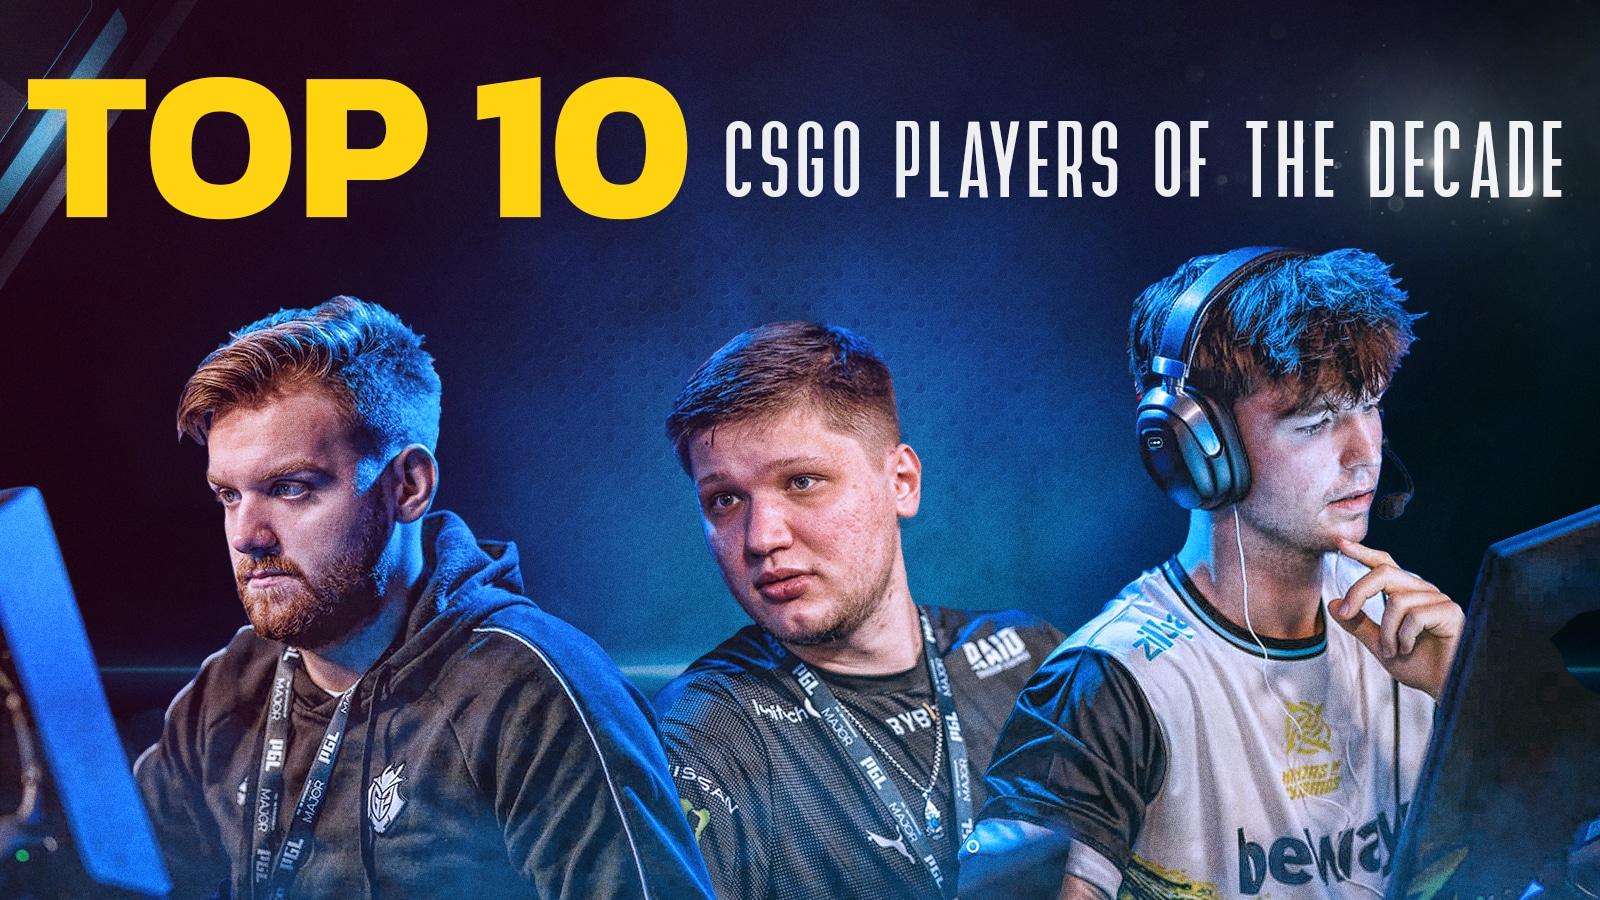 Top 20 players of 2015: Snax (4)